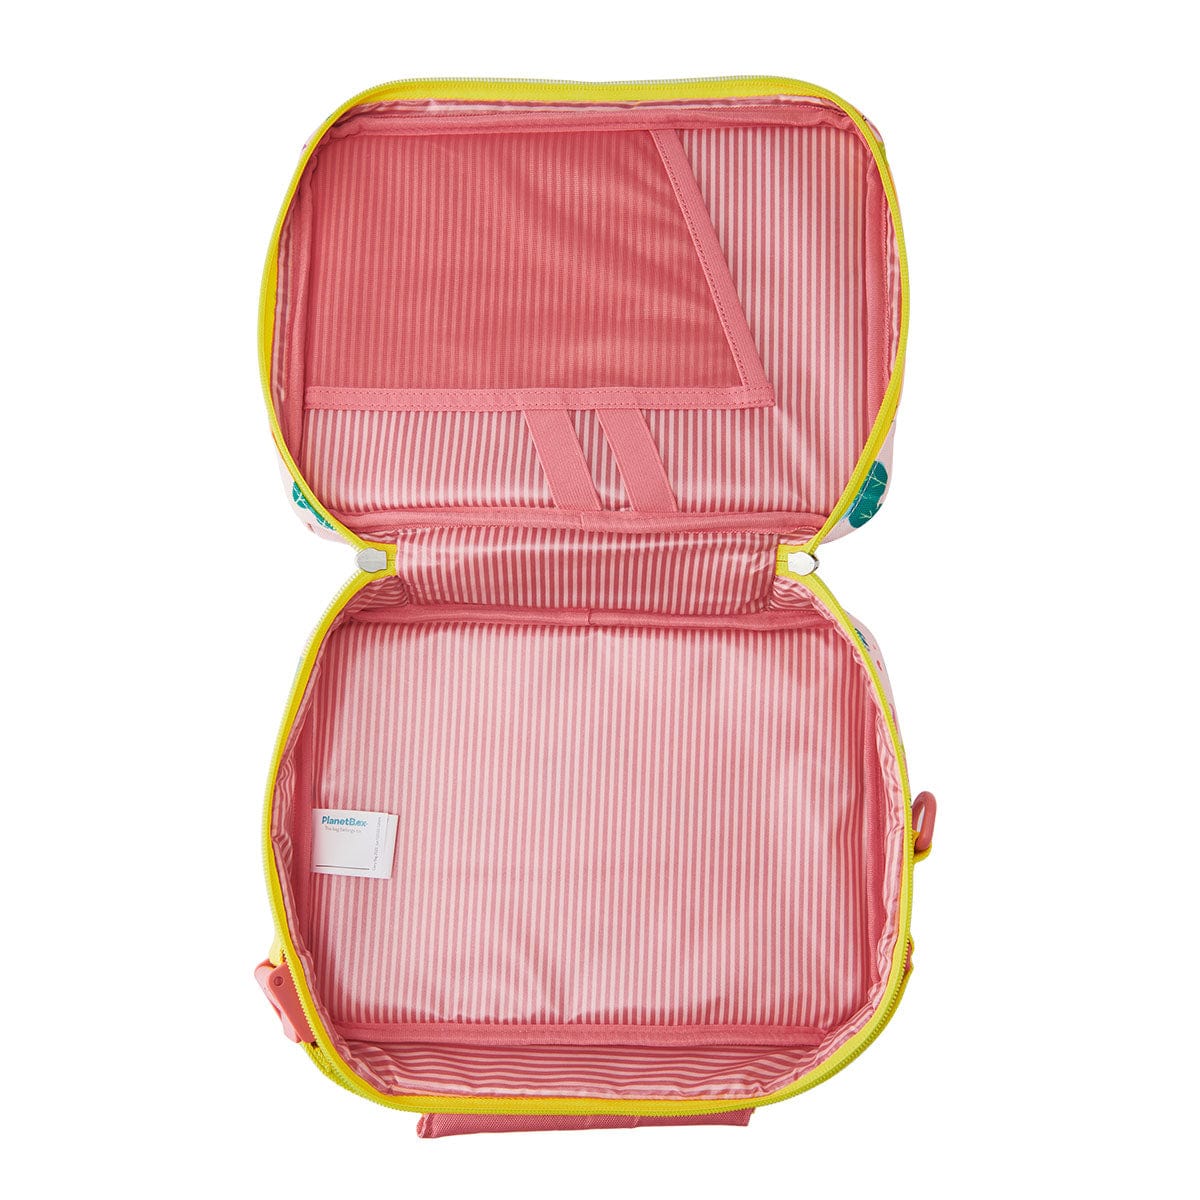 PlanetBox Insulated Carry Bag for Rover or Launch: Fairytale Fantasy